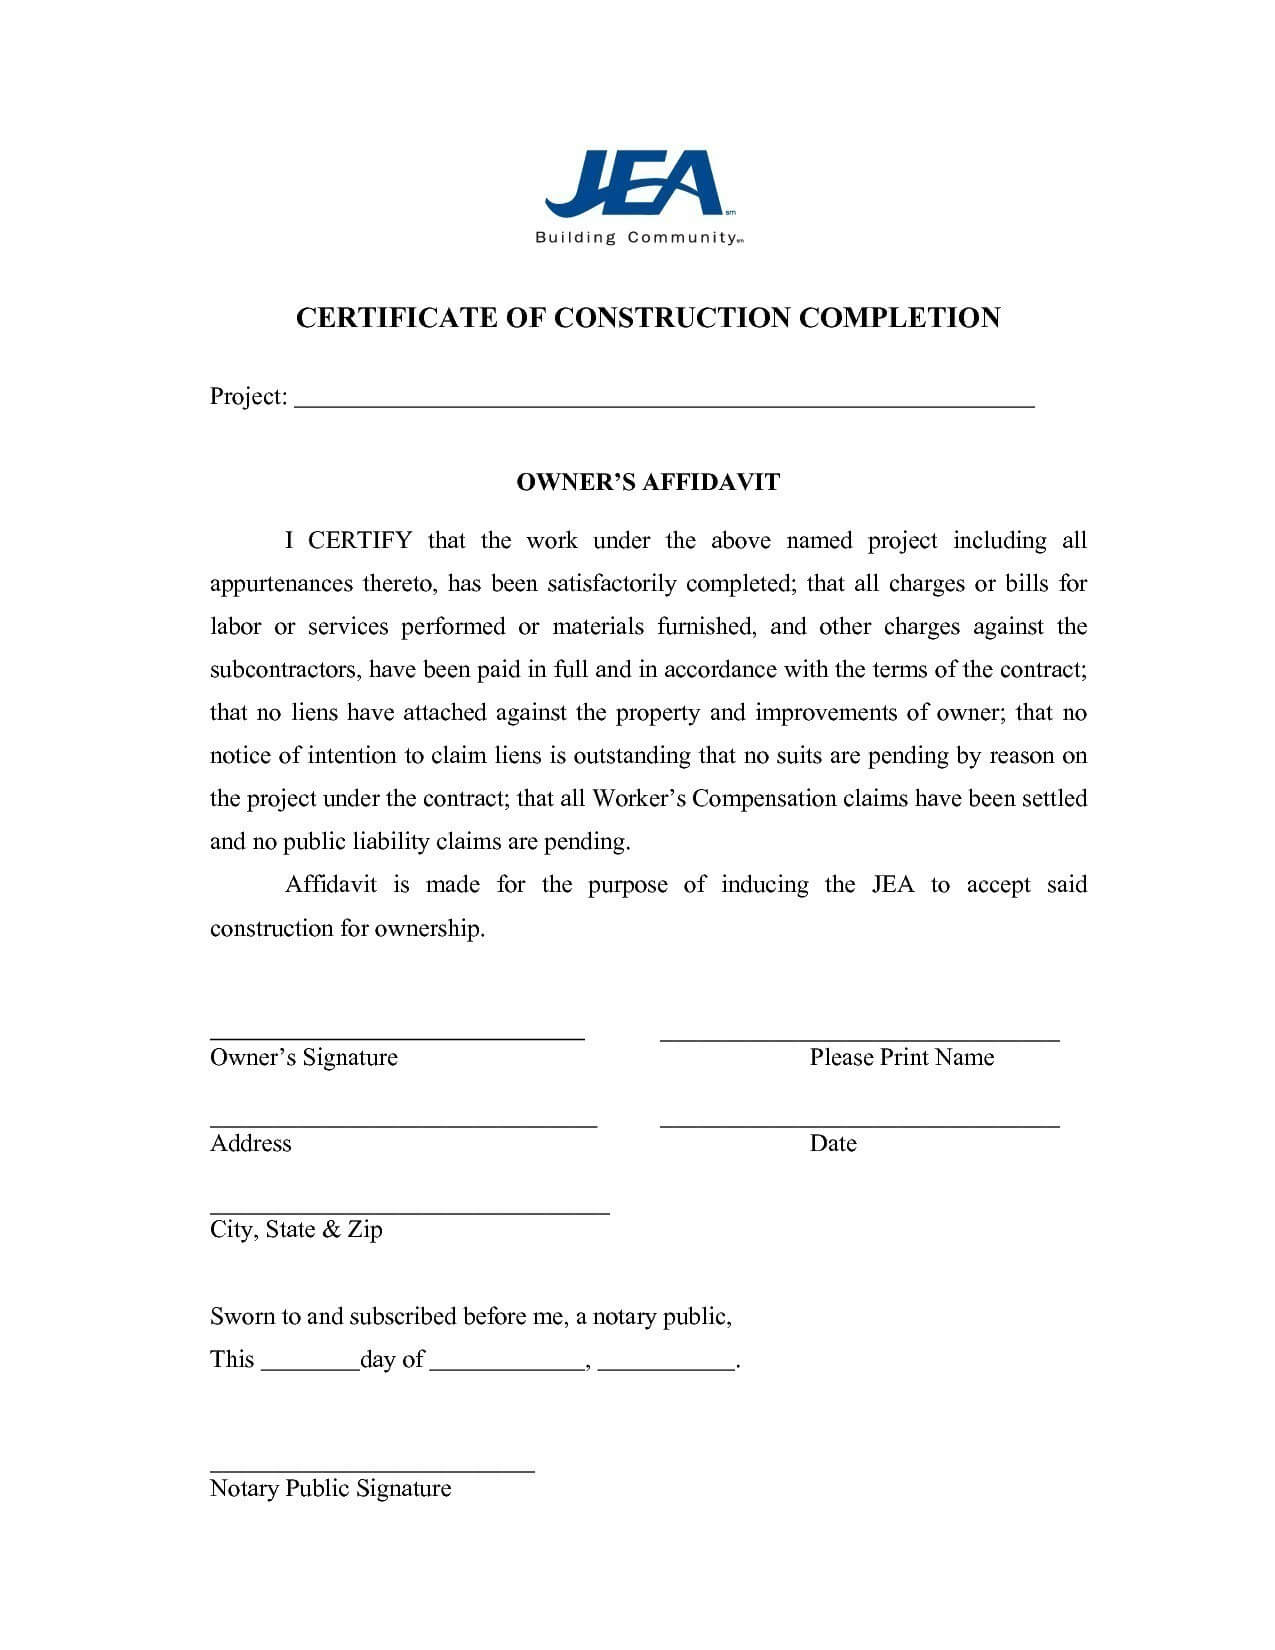 Project Completion Certificate Sample – Zimer.bwong.co Inside Certificate Of Completion Construction Templates